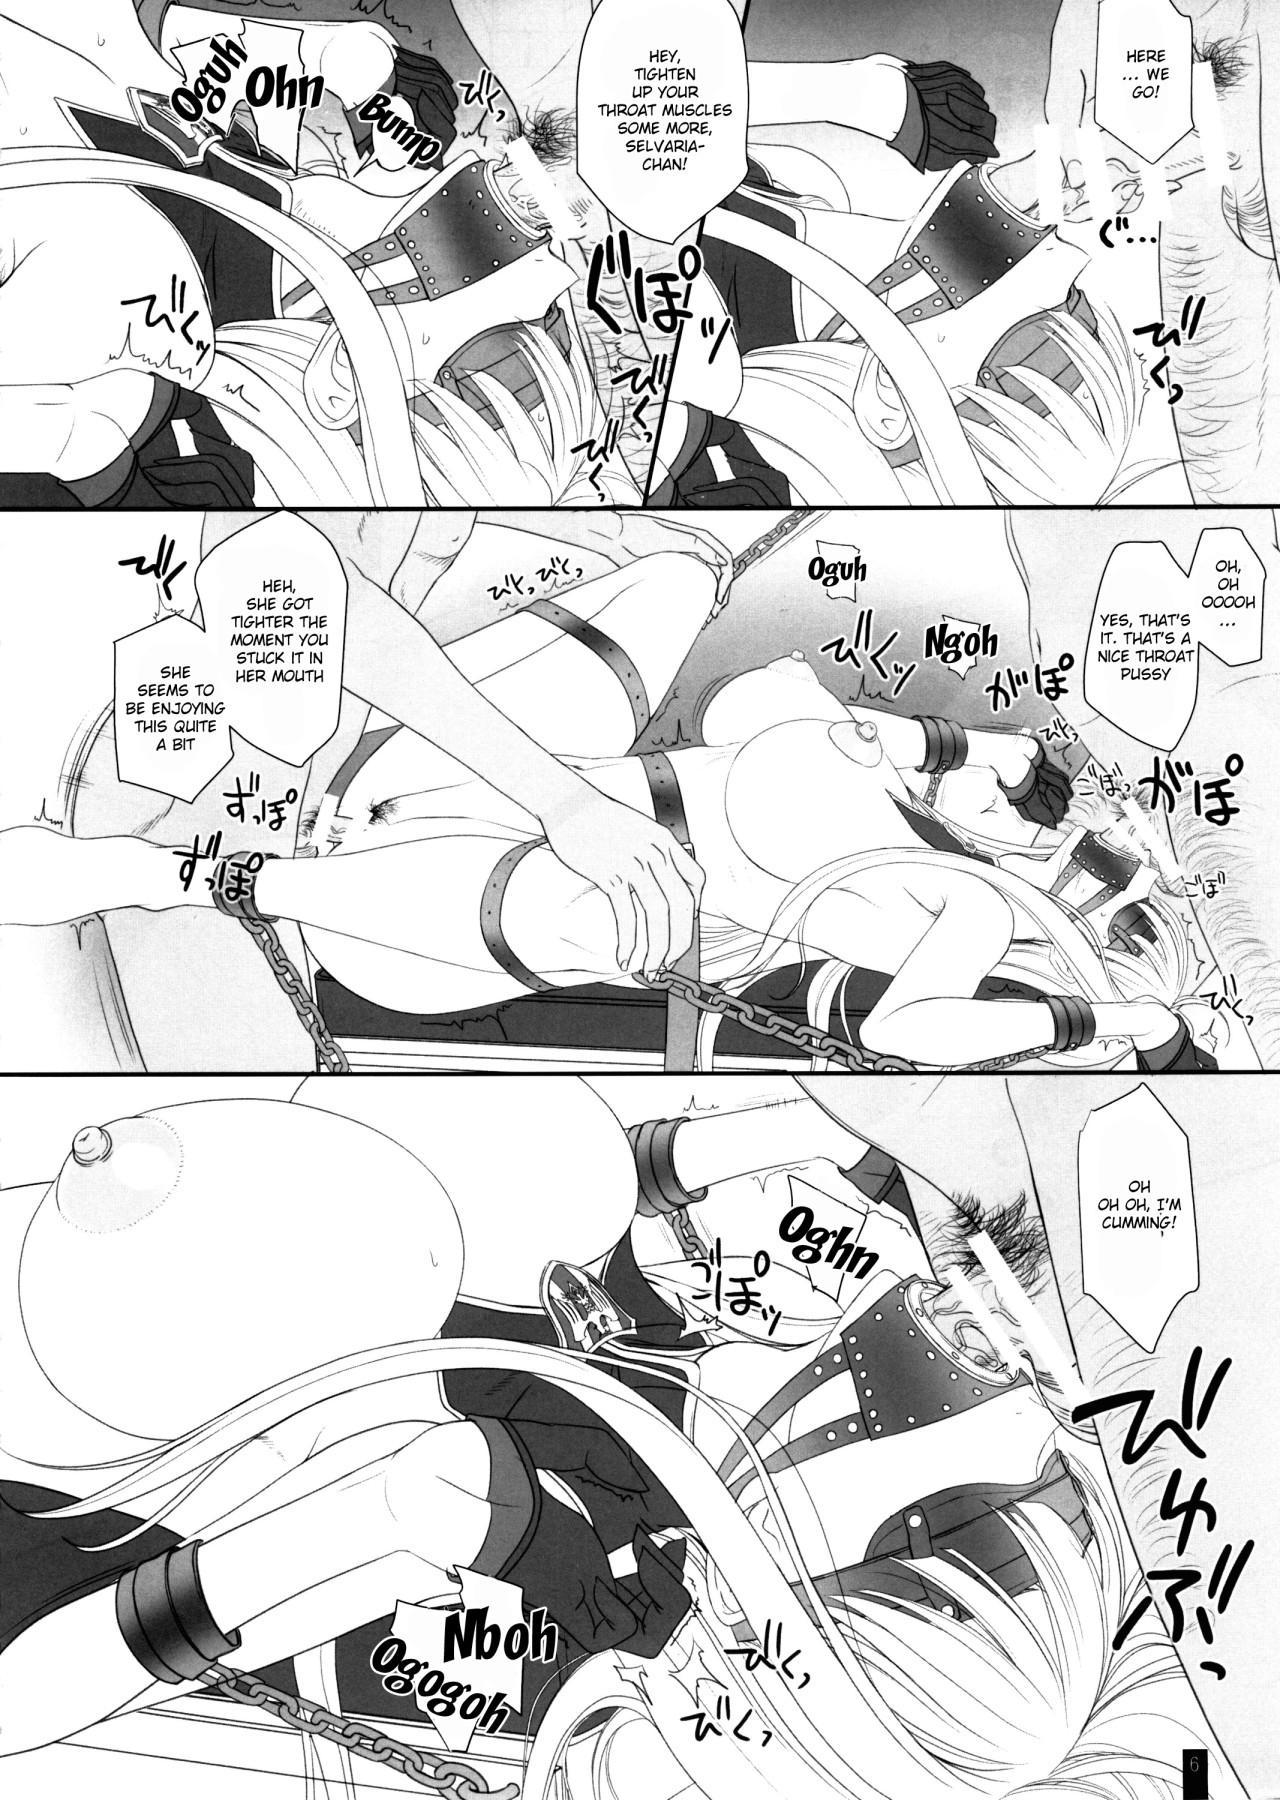 Gay Reality CAPITULATION 2 - Valkyria chronicles Speculum - Page 4